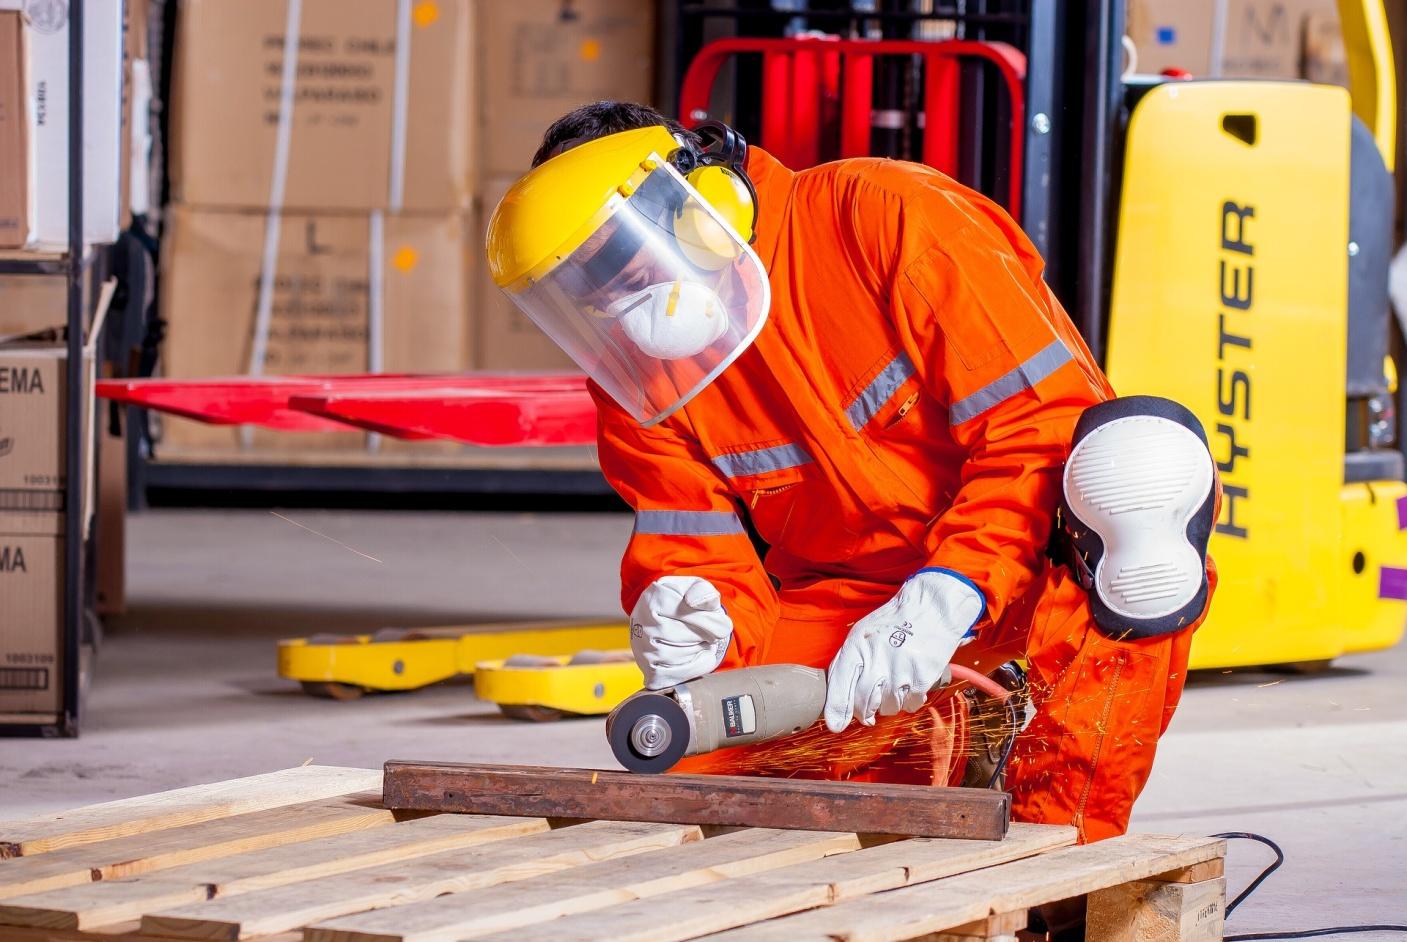 The use of appropriate protective gear such as those seen here can address safety issues at the workplace.